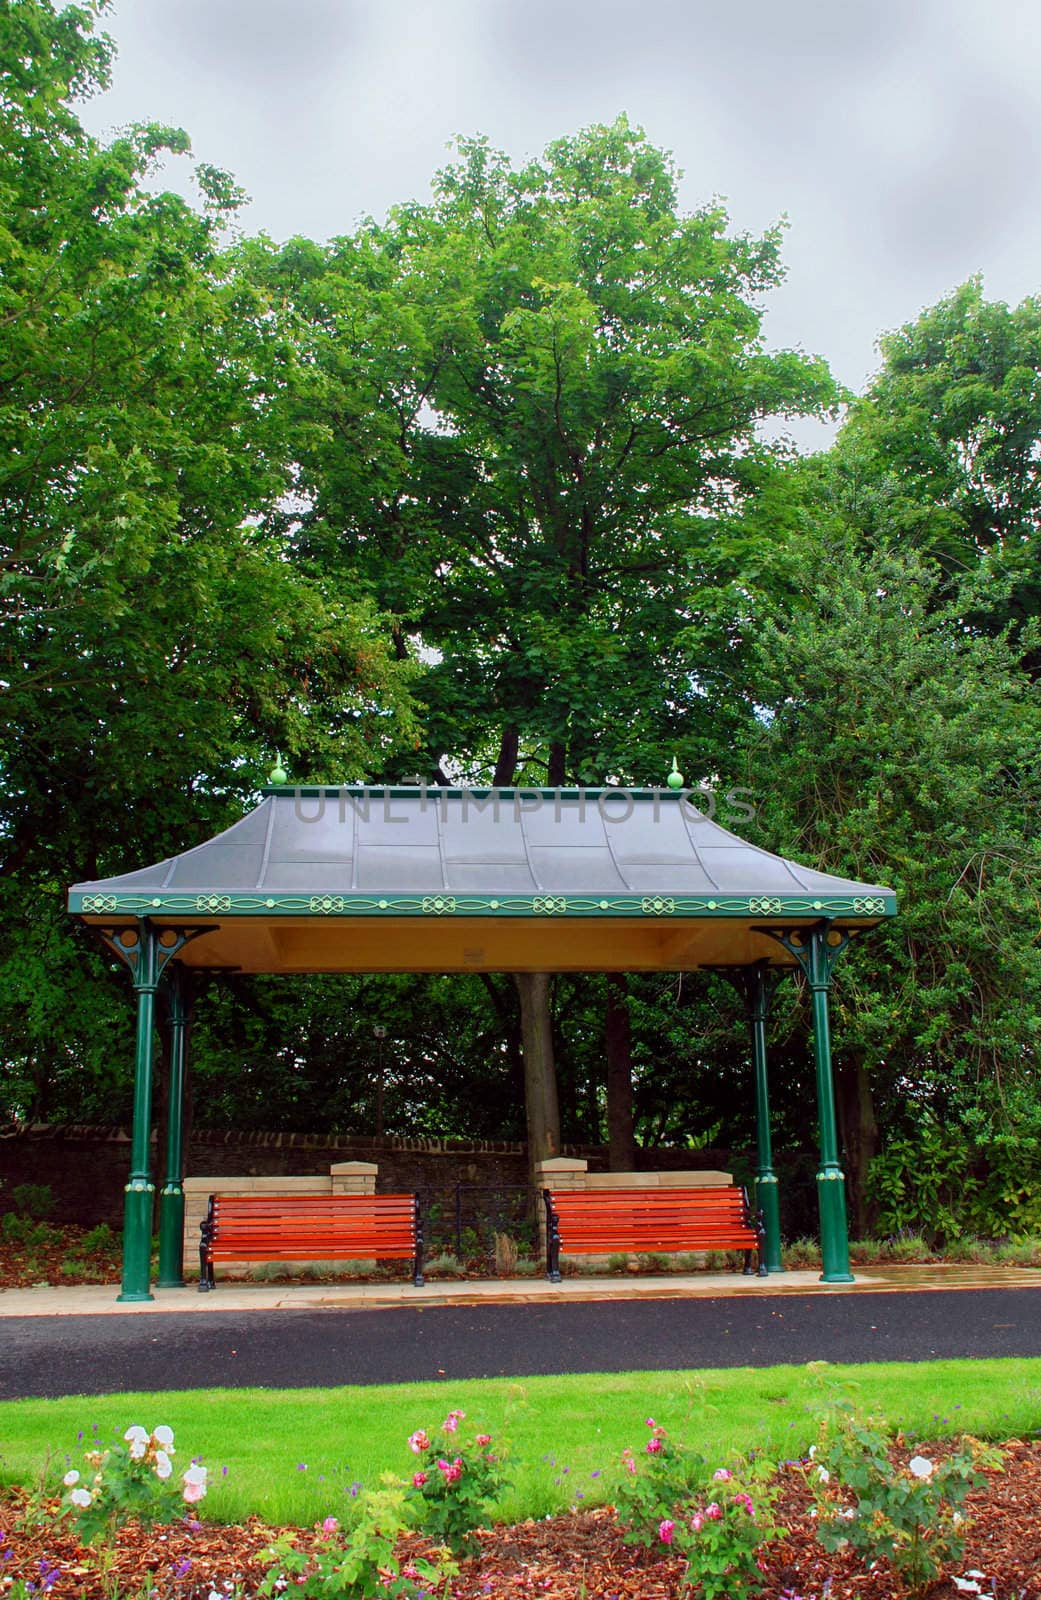 A photograph of a shelter in a park with two wooden benches